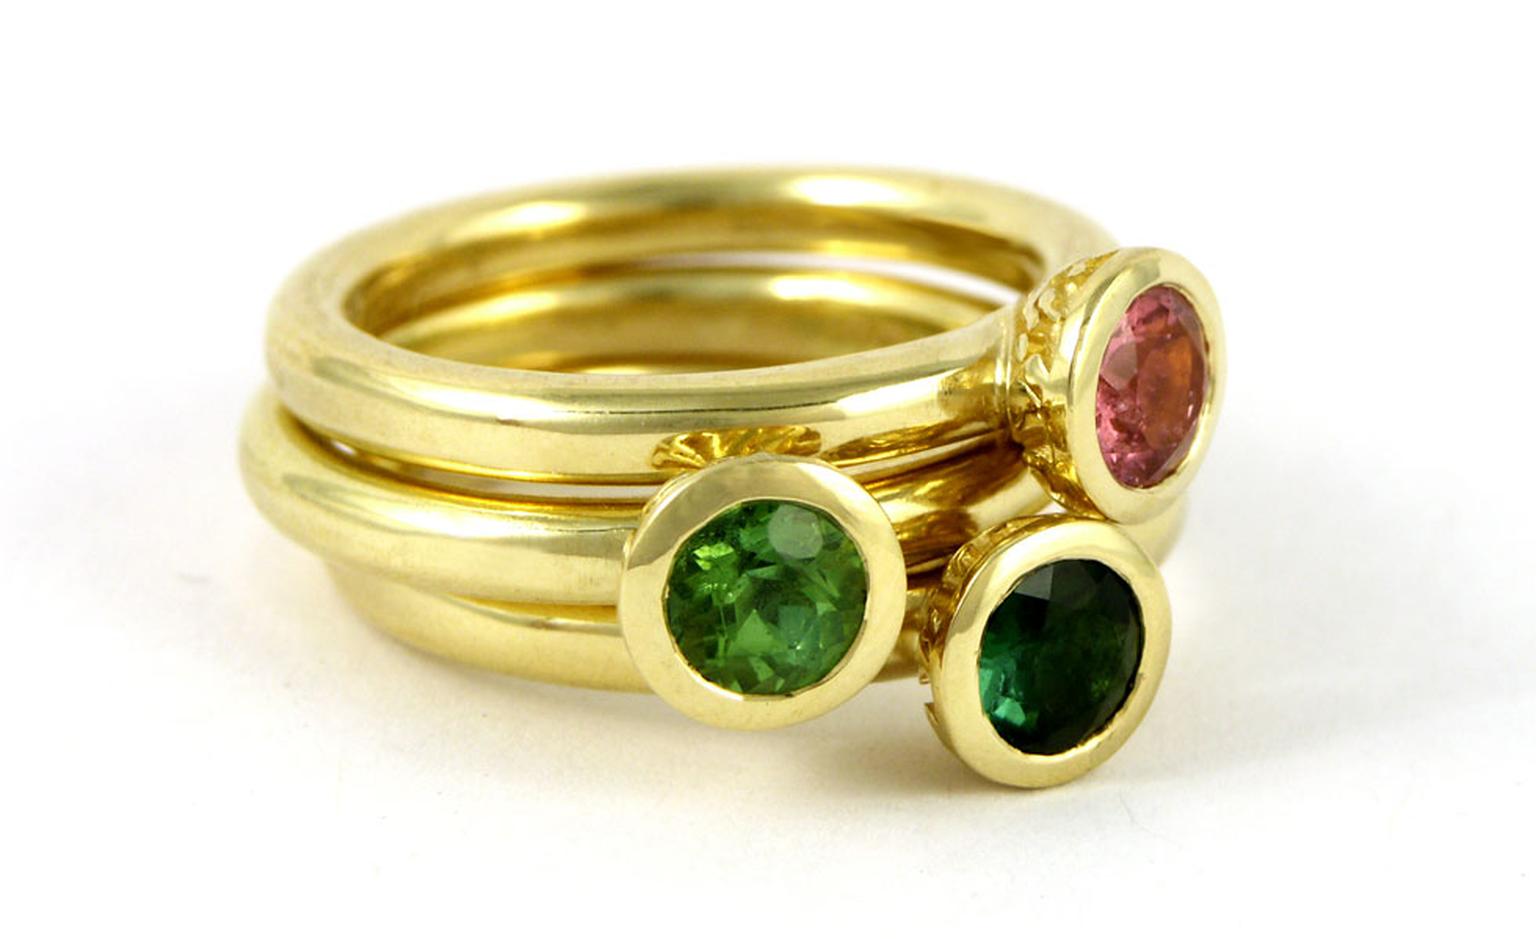 Nina stack rings that will be available in Fairtrade gold